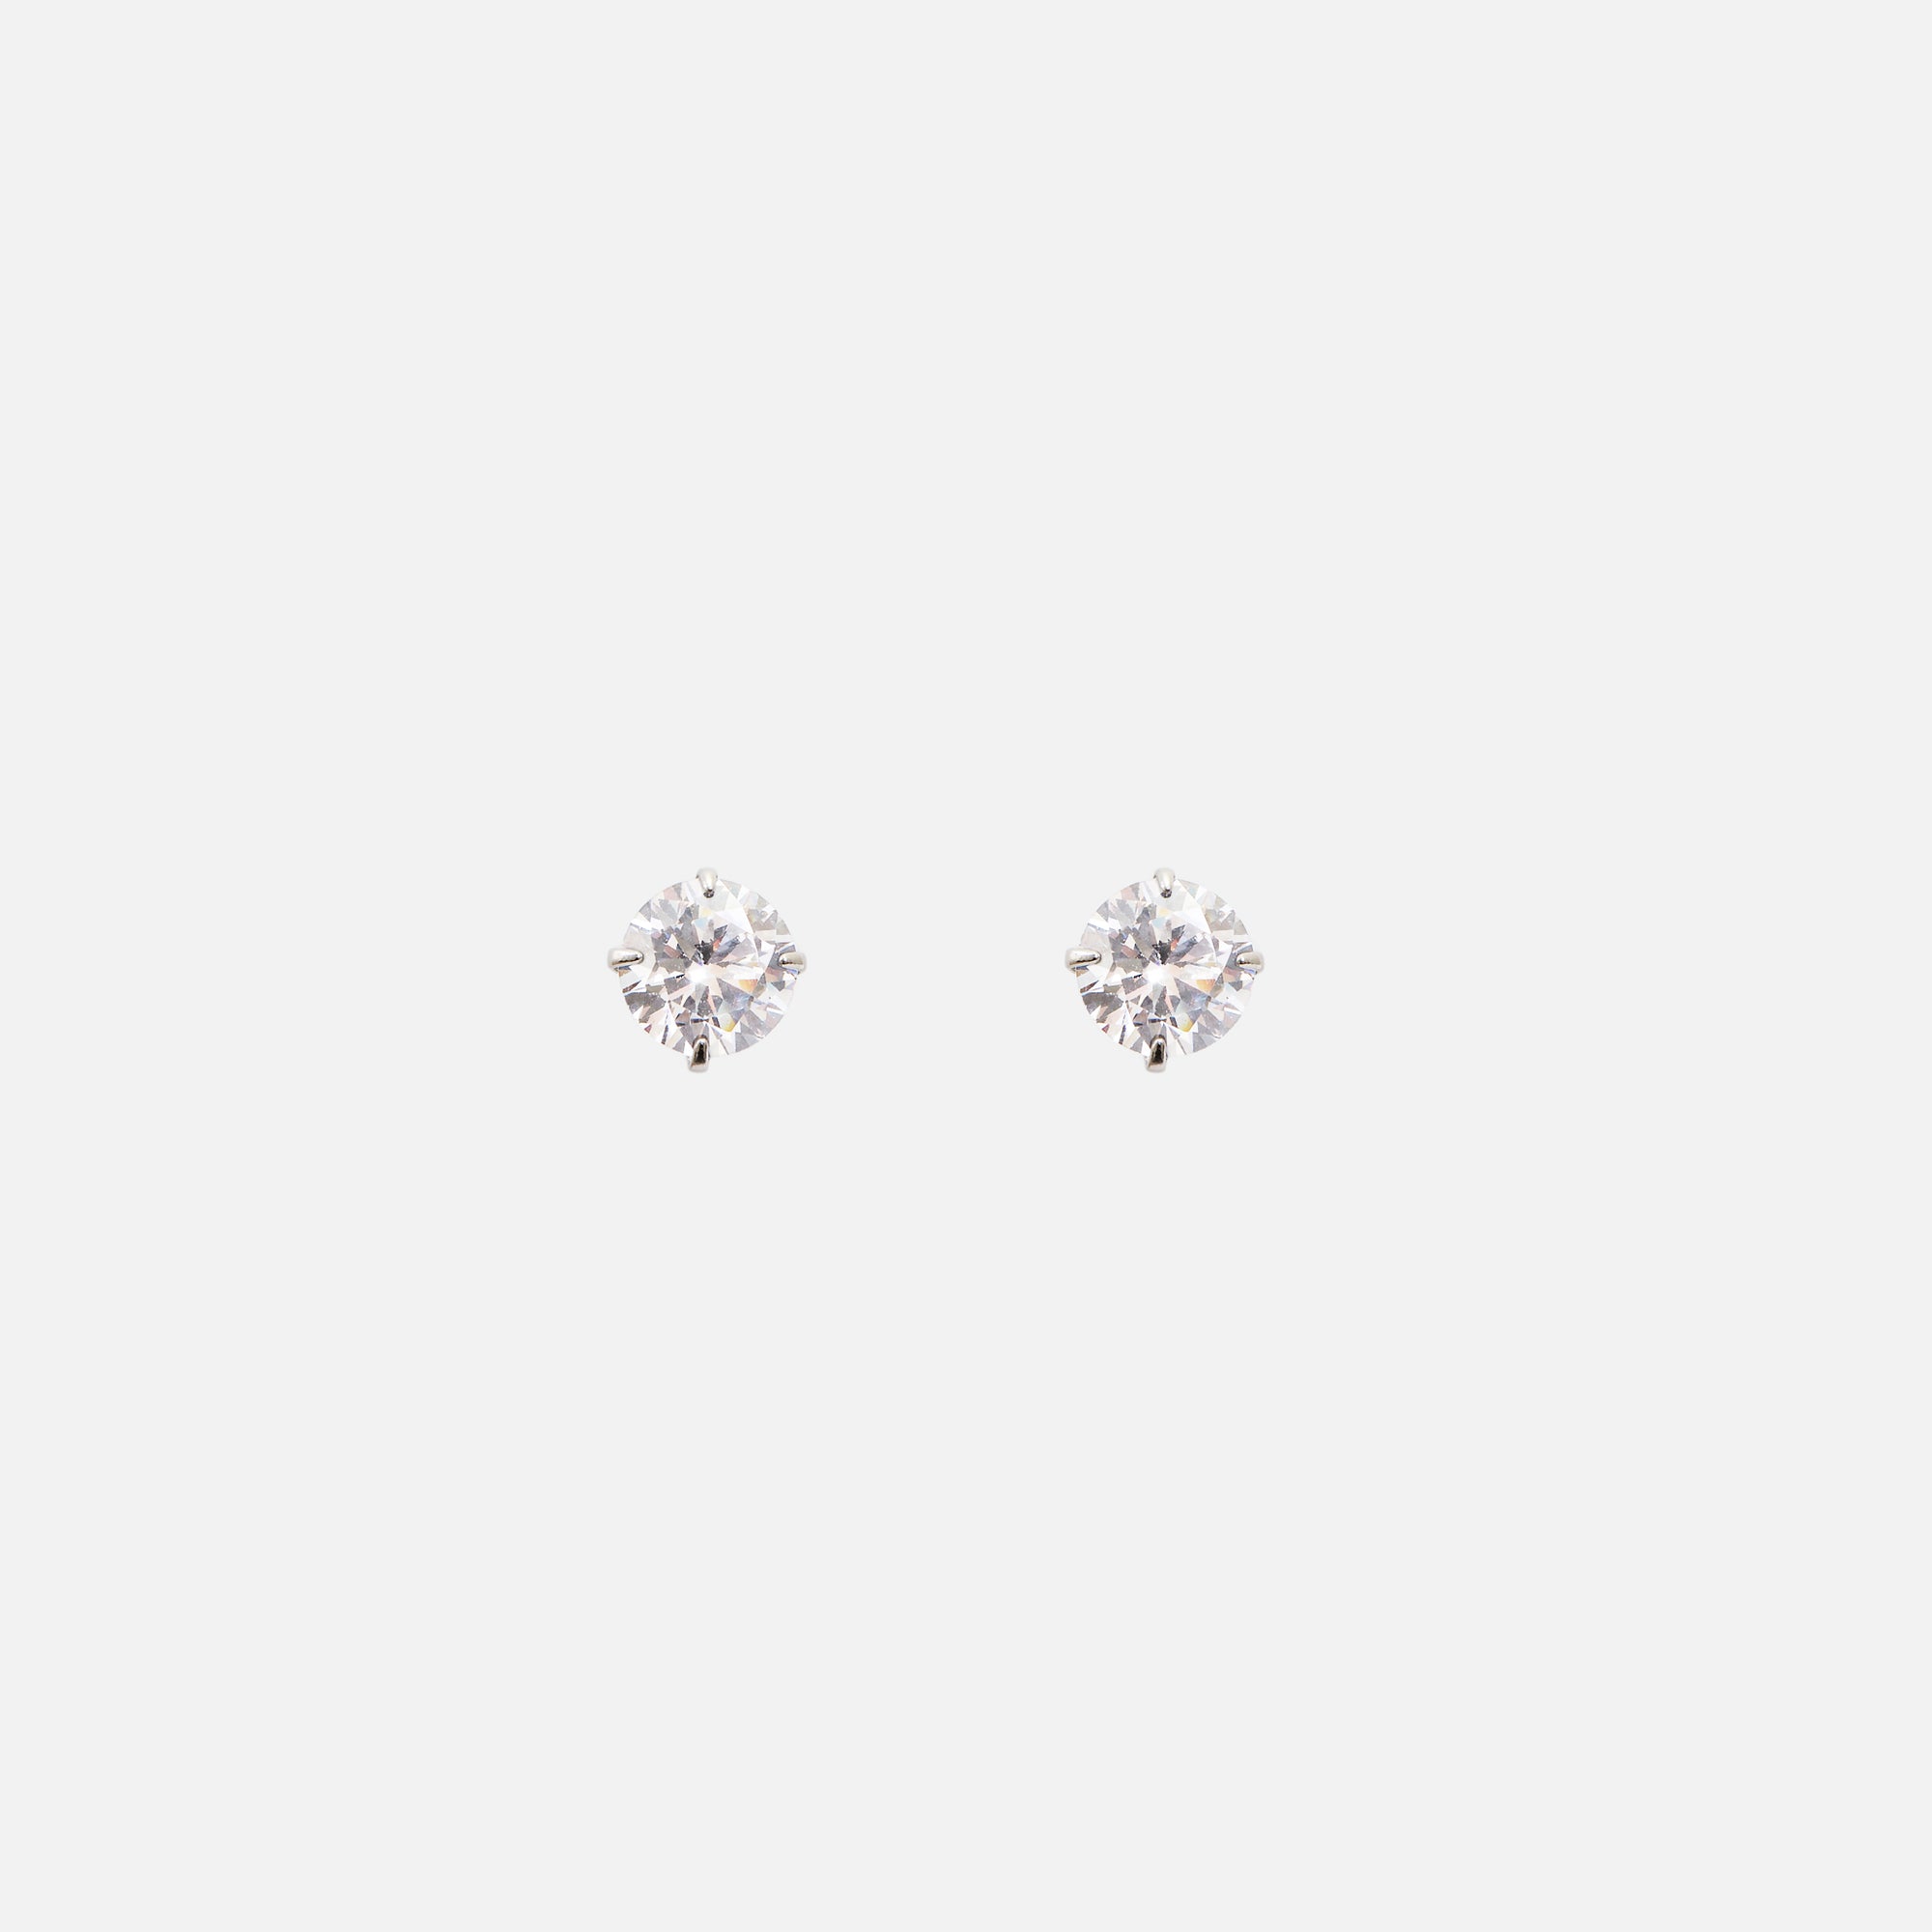 Fixed stainless steel earrings with cubic zirconia